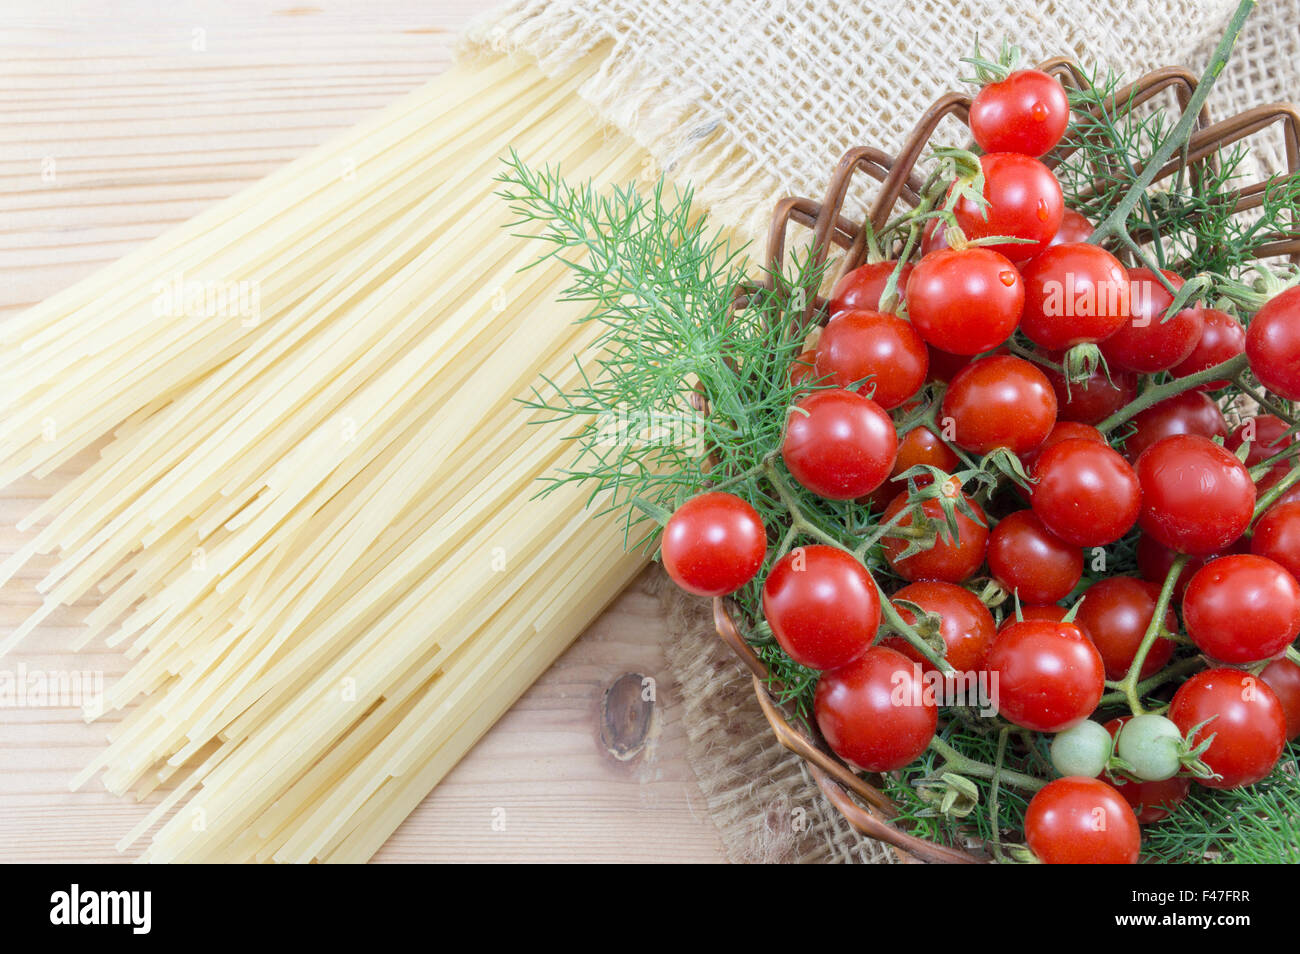 Cherry tomato and spaghetti ready for cooking Stock Photo